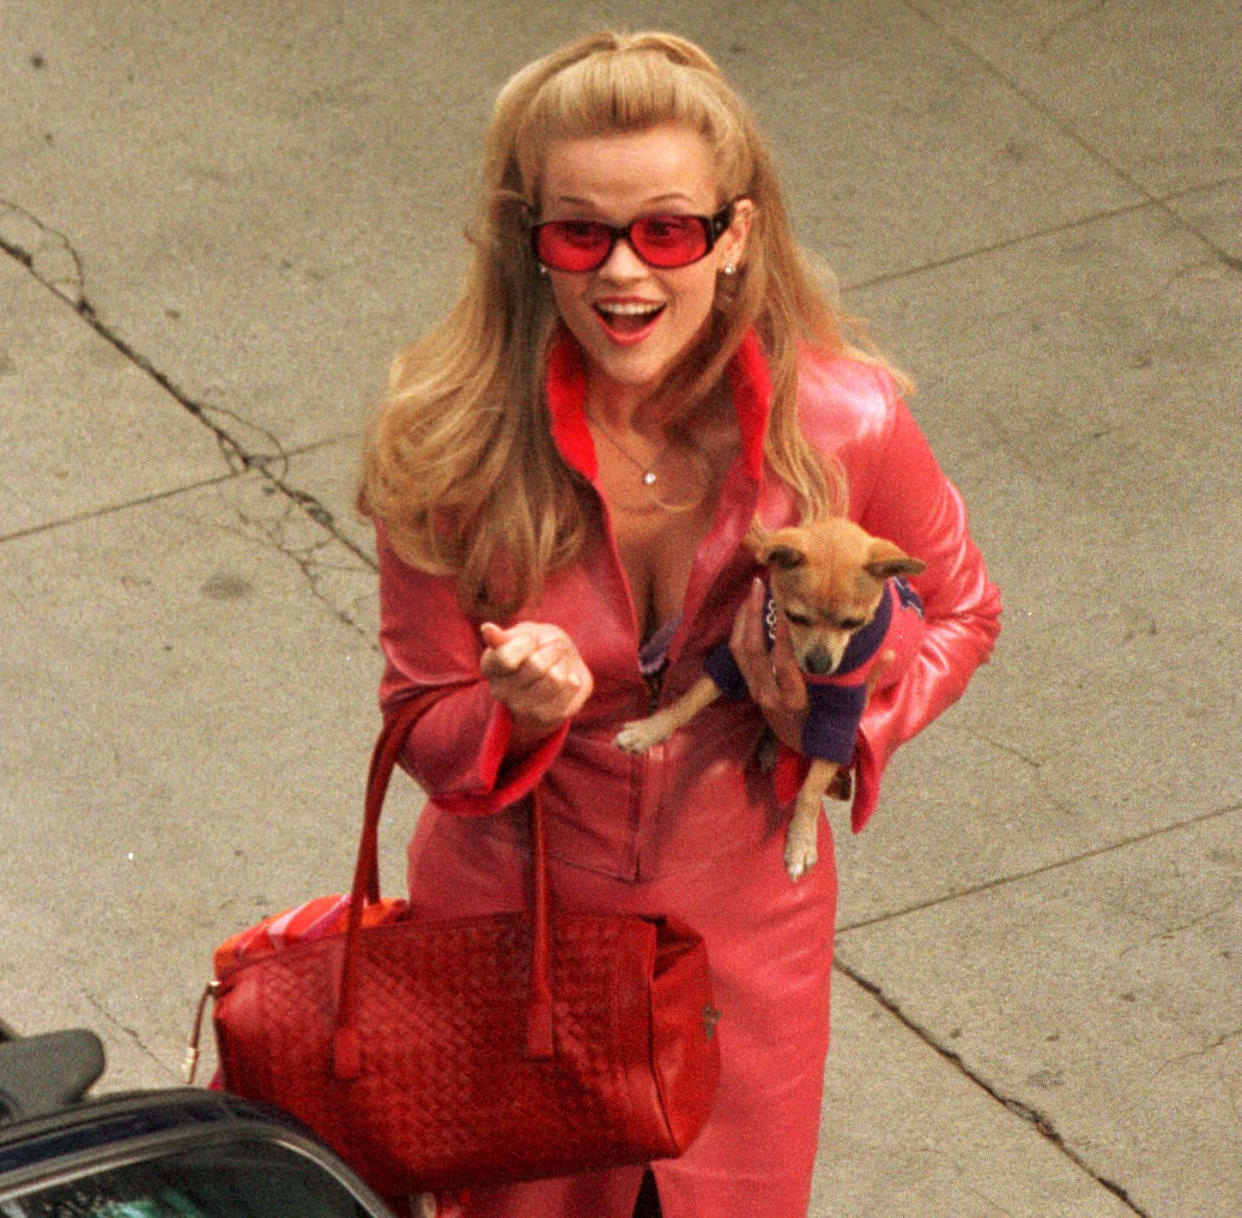  00s icons - elle woods legally blonde. 